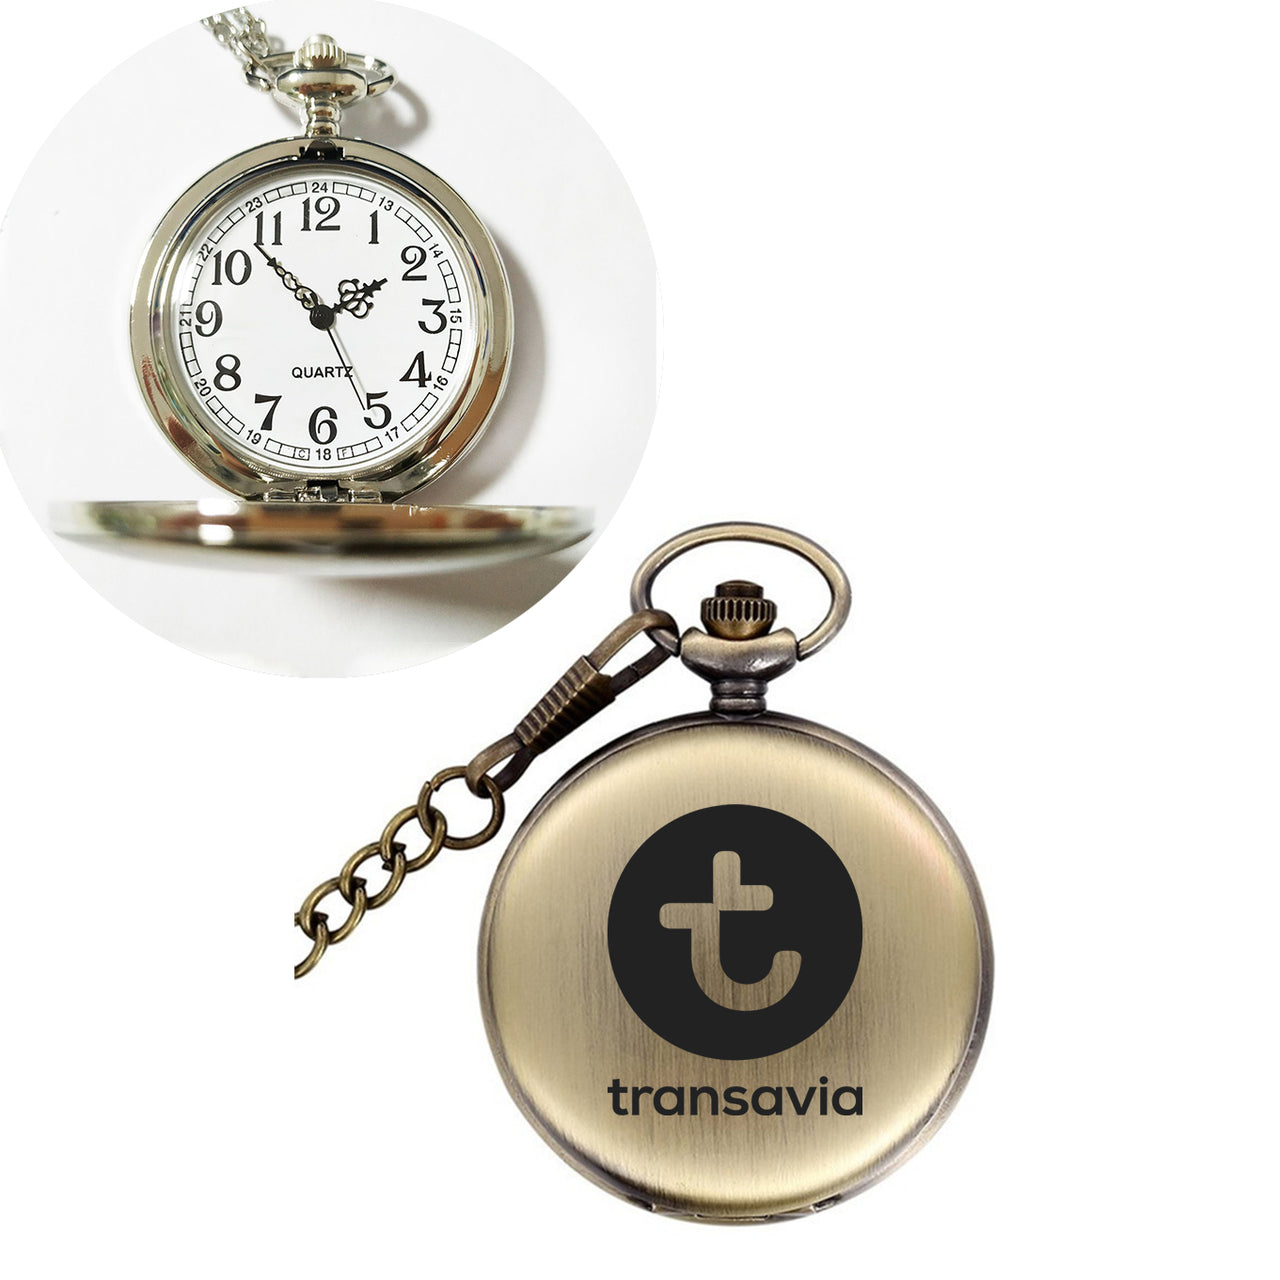 Transavia France Airlines Designed Pocket Watches